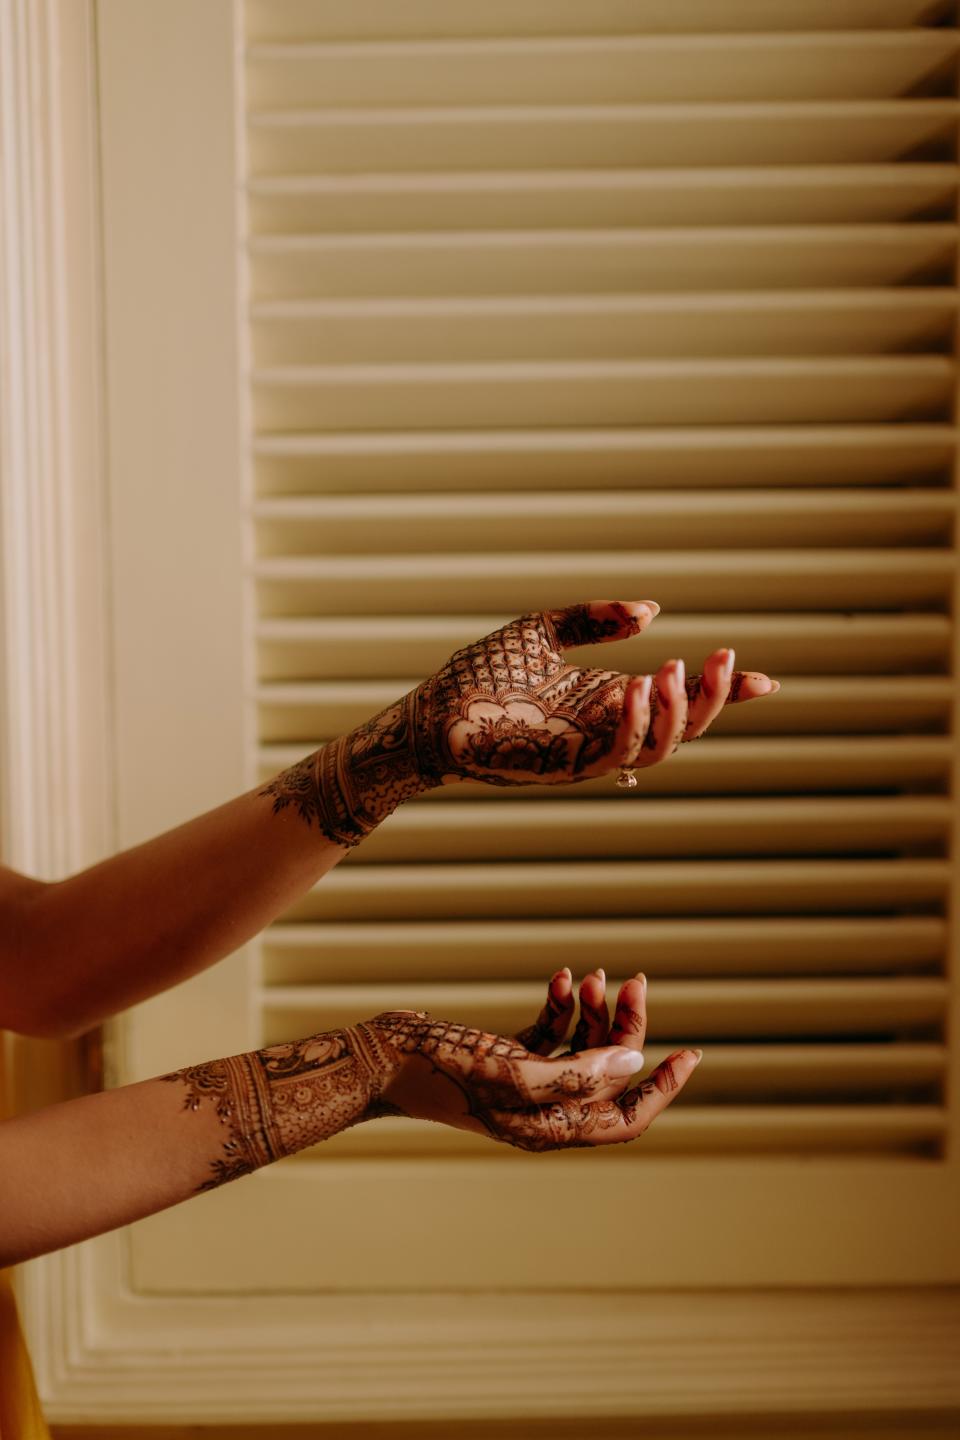 Mitali shows off her henna from the pre-wedding mehendi ceremony.